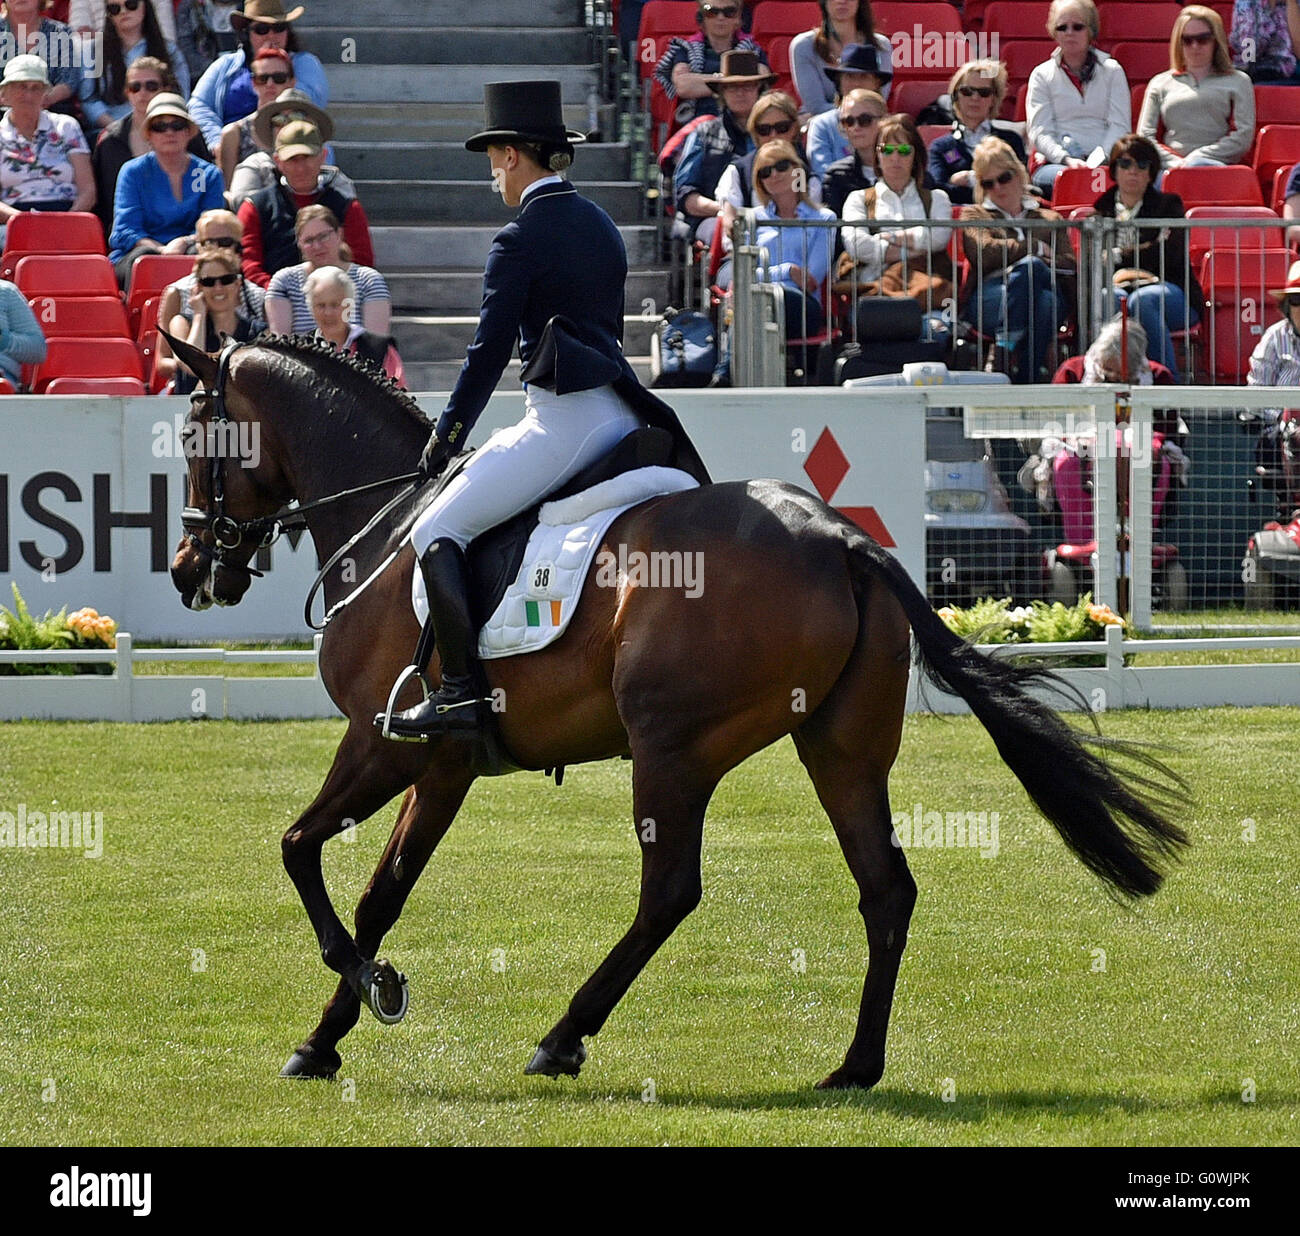 Badminton, Gloucestershire, UK. 5th May, 2016. Mitsubishi Motors Badminton Horse Trials.Camilla Spiers Ireland and Porterhouse Just A Jiff compete in the Dressage.   Mitsubishi are celebrating 25years partnership with Badminton. Date 05/05/2016   Credit:  charlie bryan/Alamy Live News Stock Photo